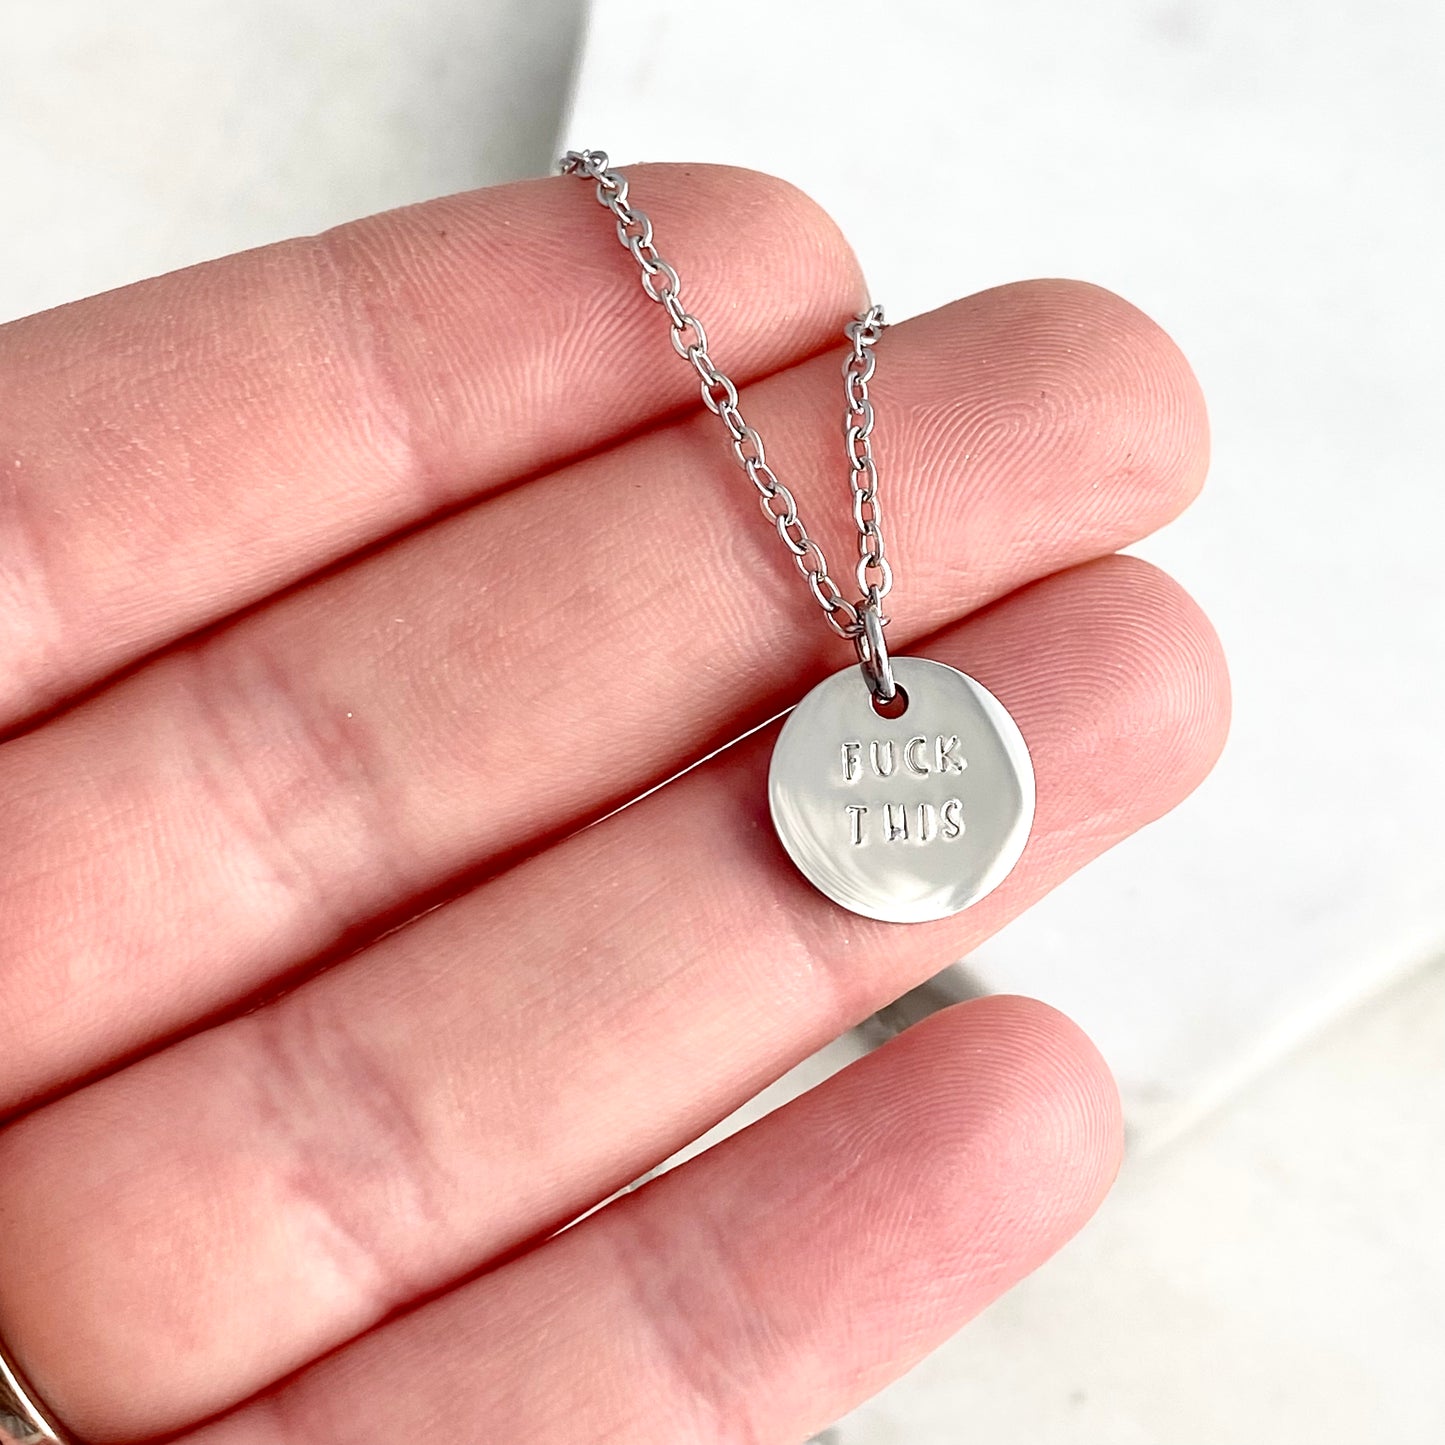 Fuck This / Fuck That, Reversible Hand Stamped Coin Necklace Necklaces callistafaye   